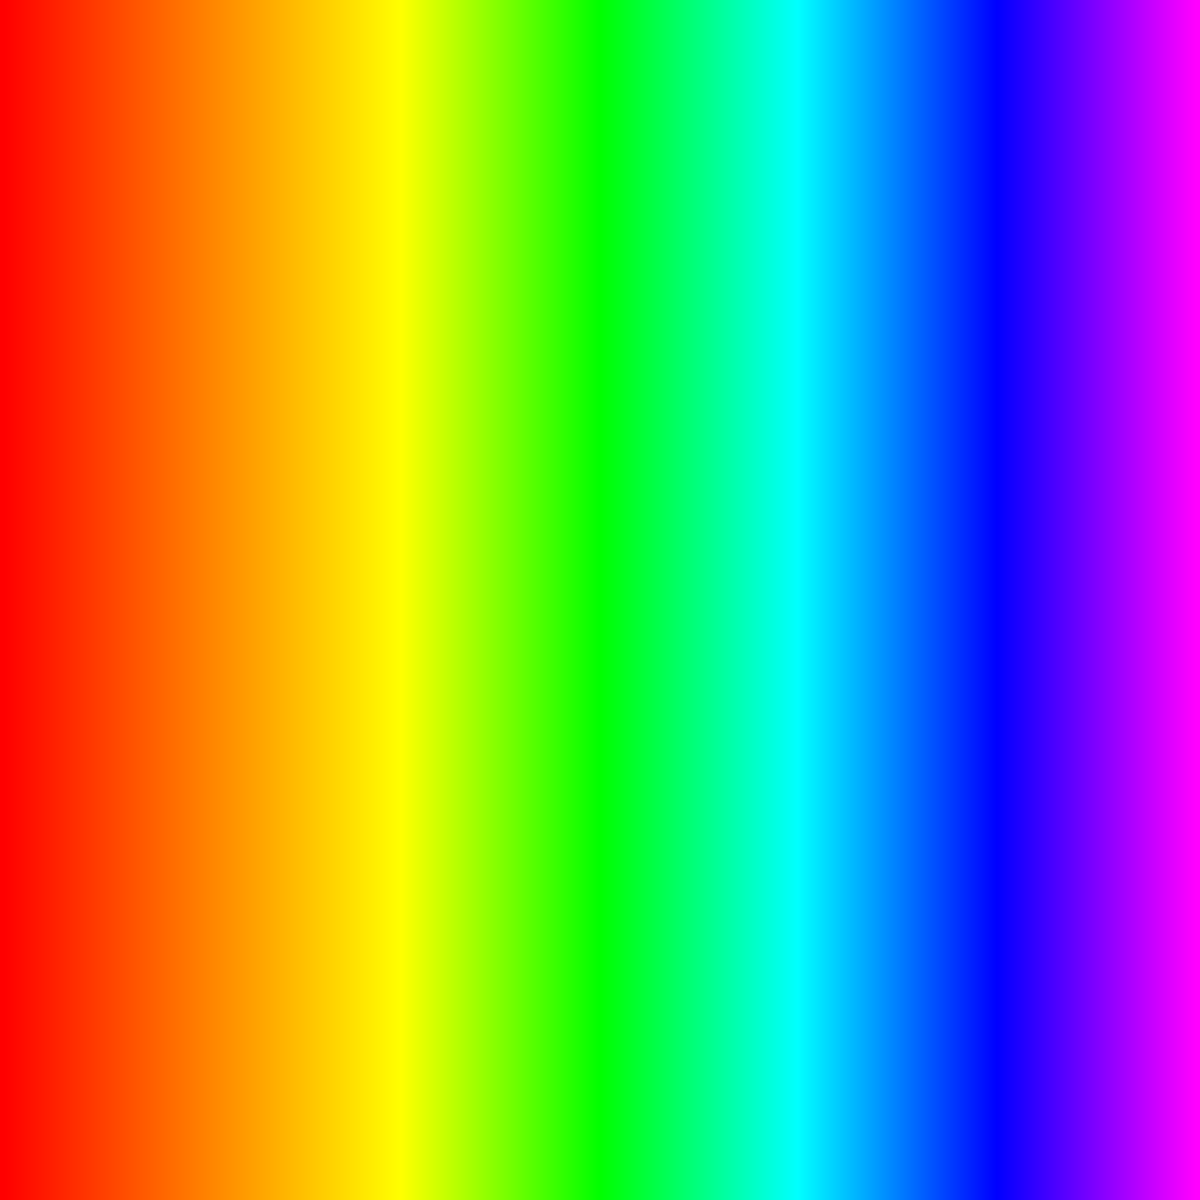 Download File:Rainbow-gradient-fully-saturated.svg - Wikimedia Commons